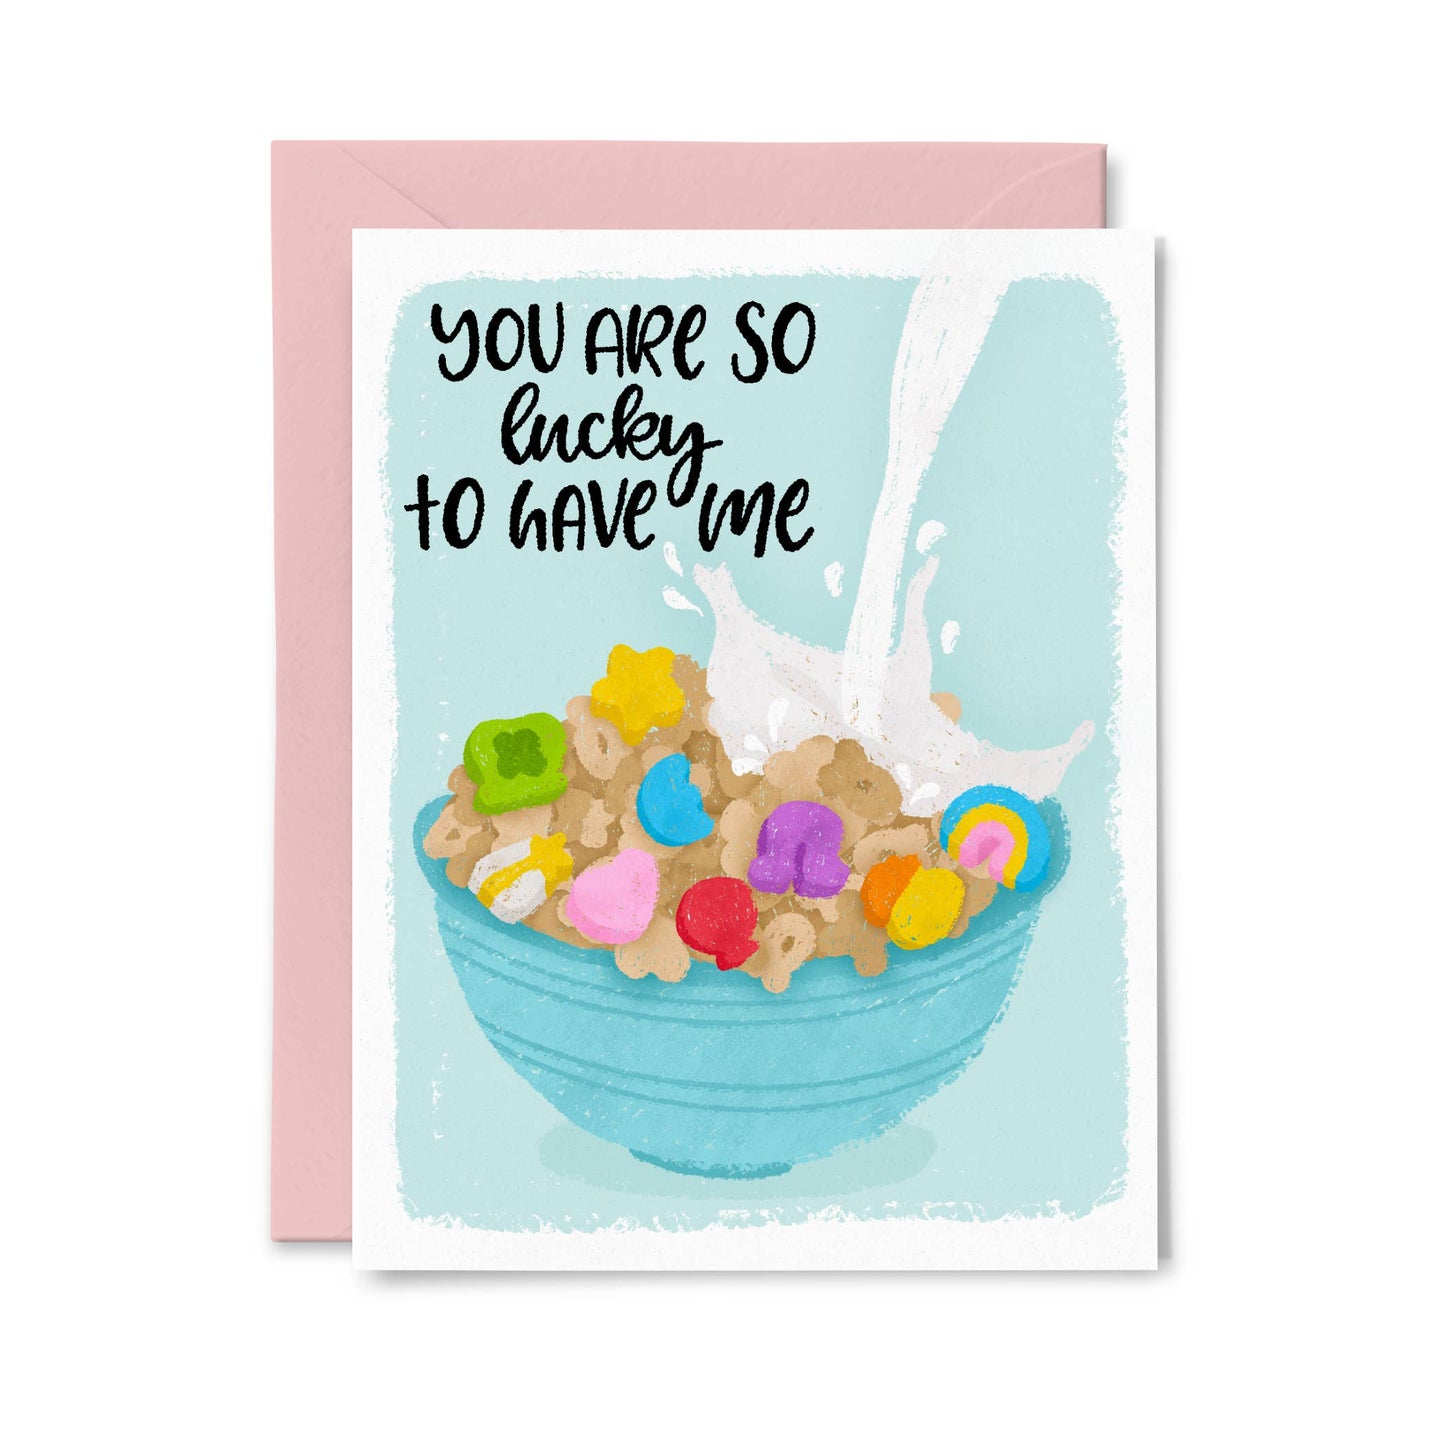 Paper Bunny Press - You're Lucky to Have me - Funny Valentine's Day + Love Card